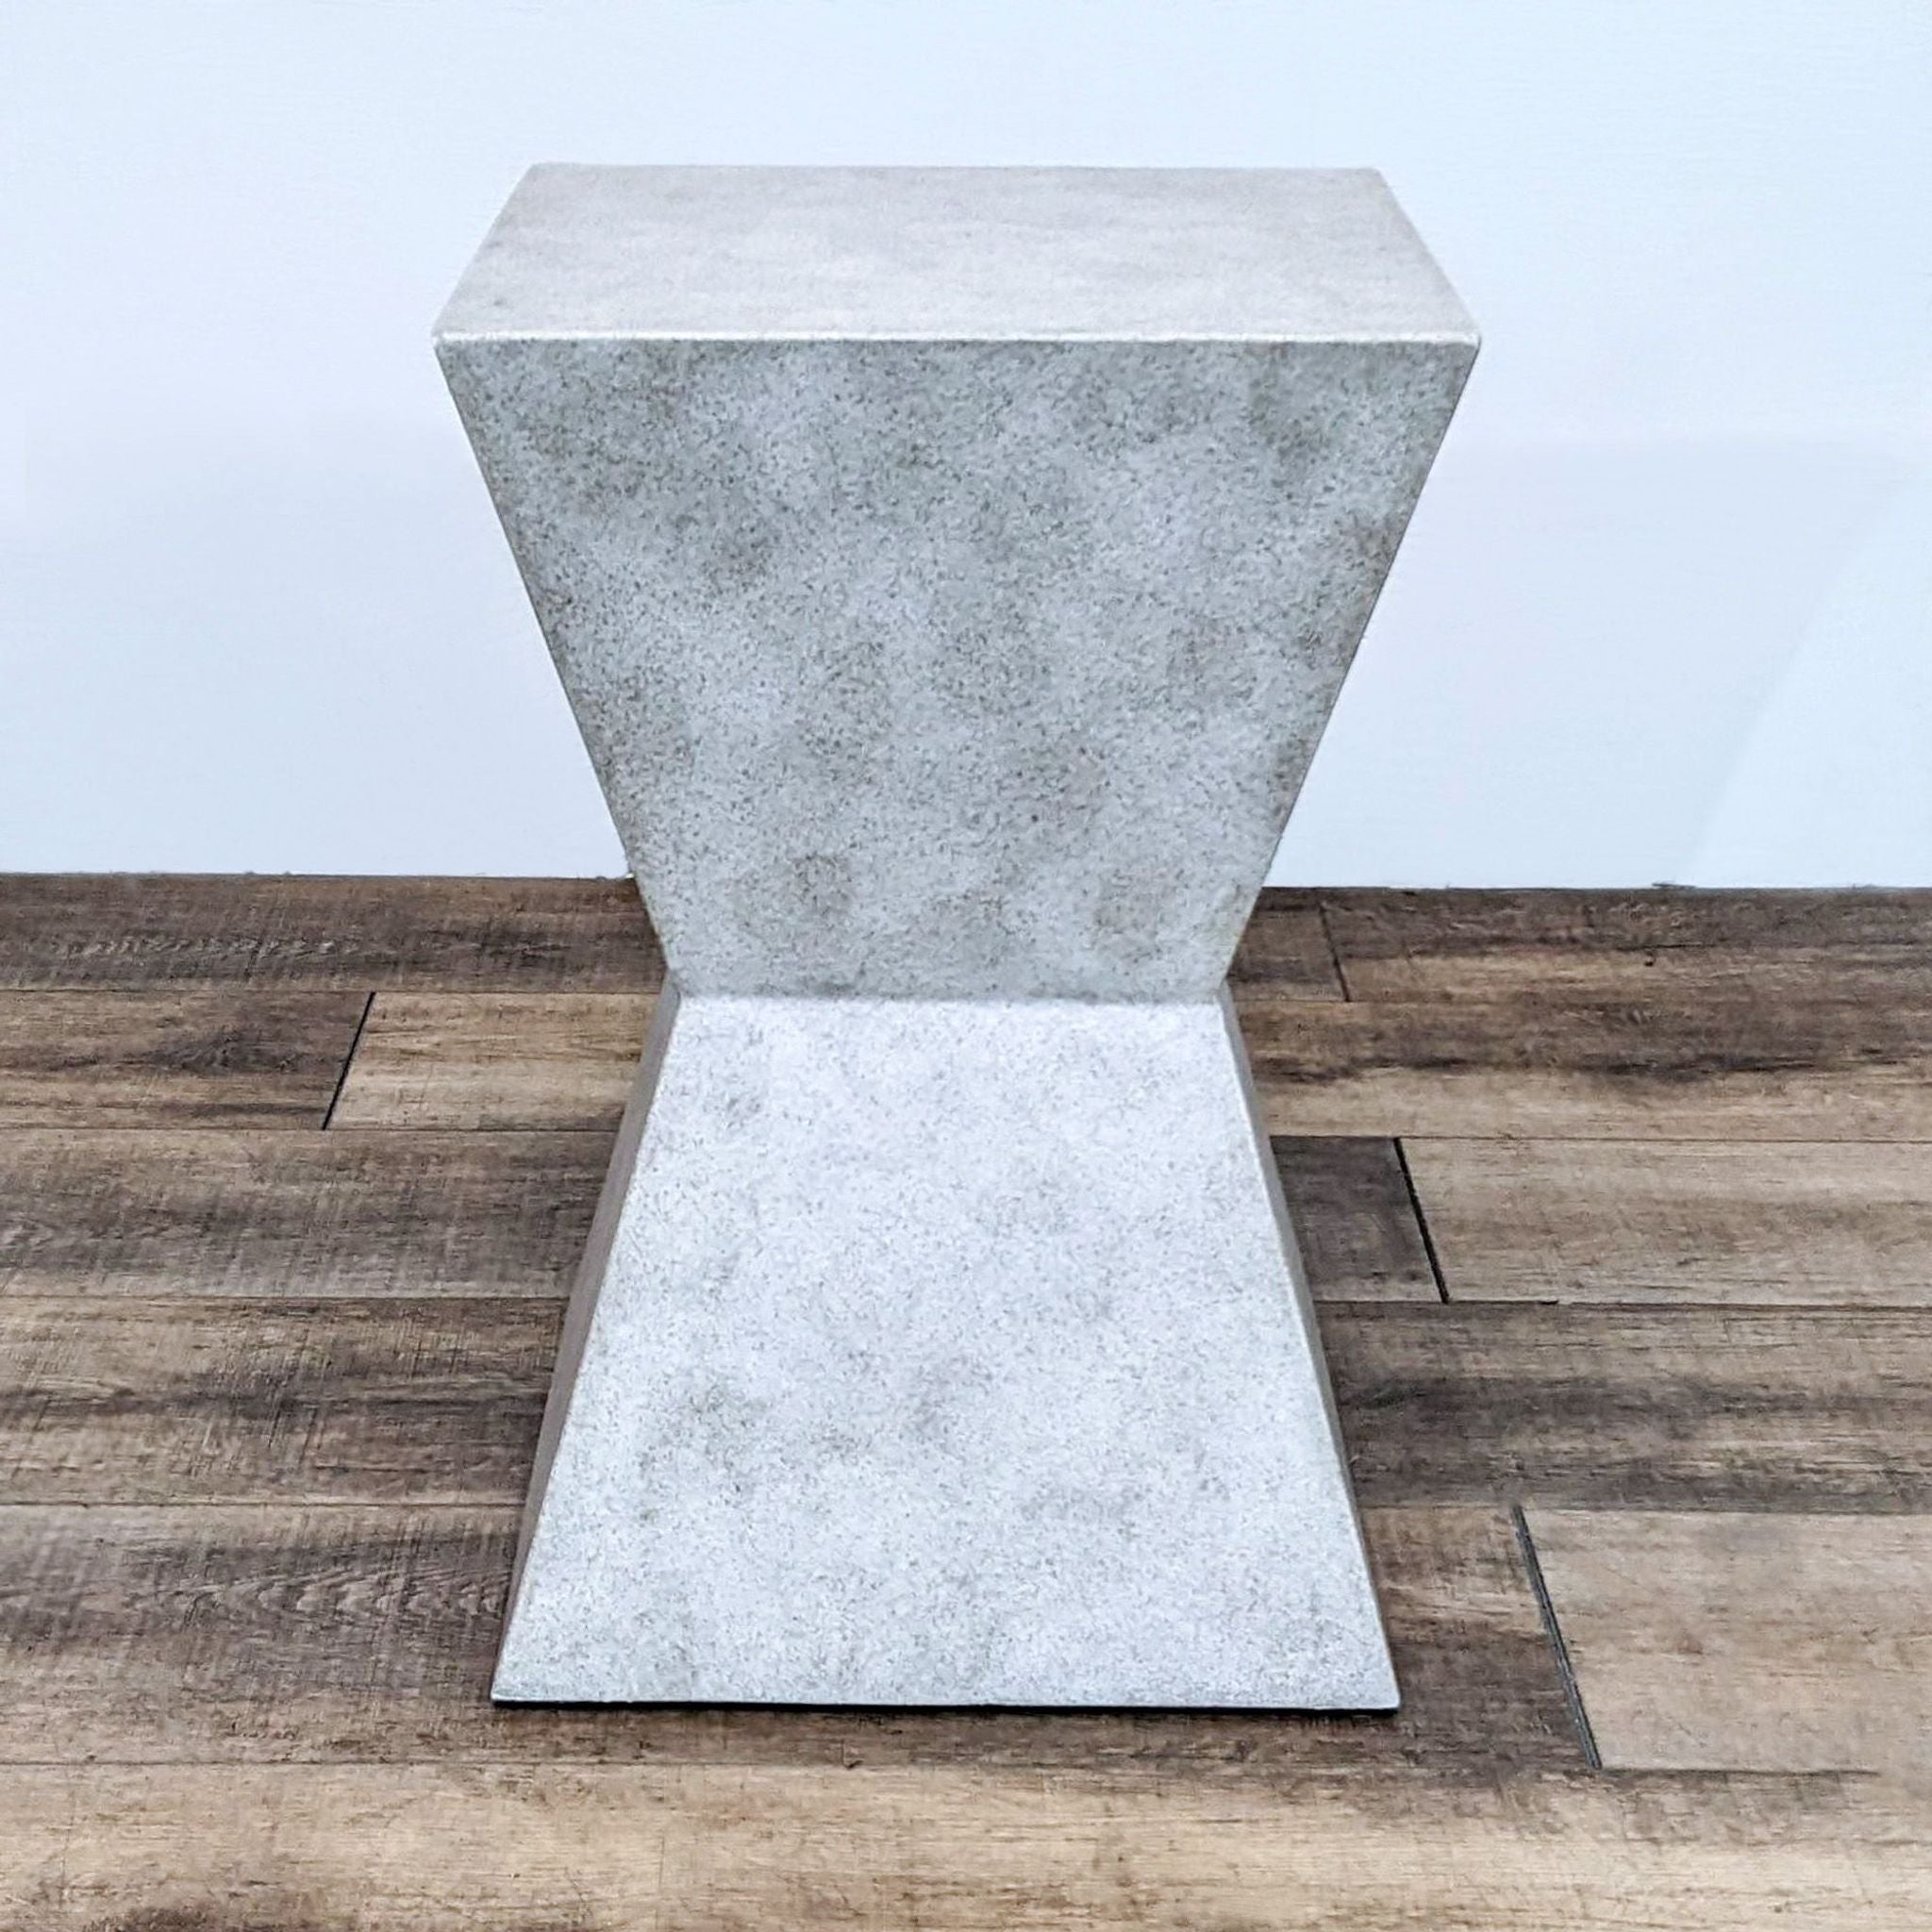 Modern Reperch end table mimicking concrete, positioned diagonally on hardwood flooring.